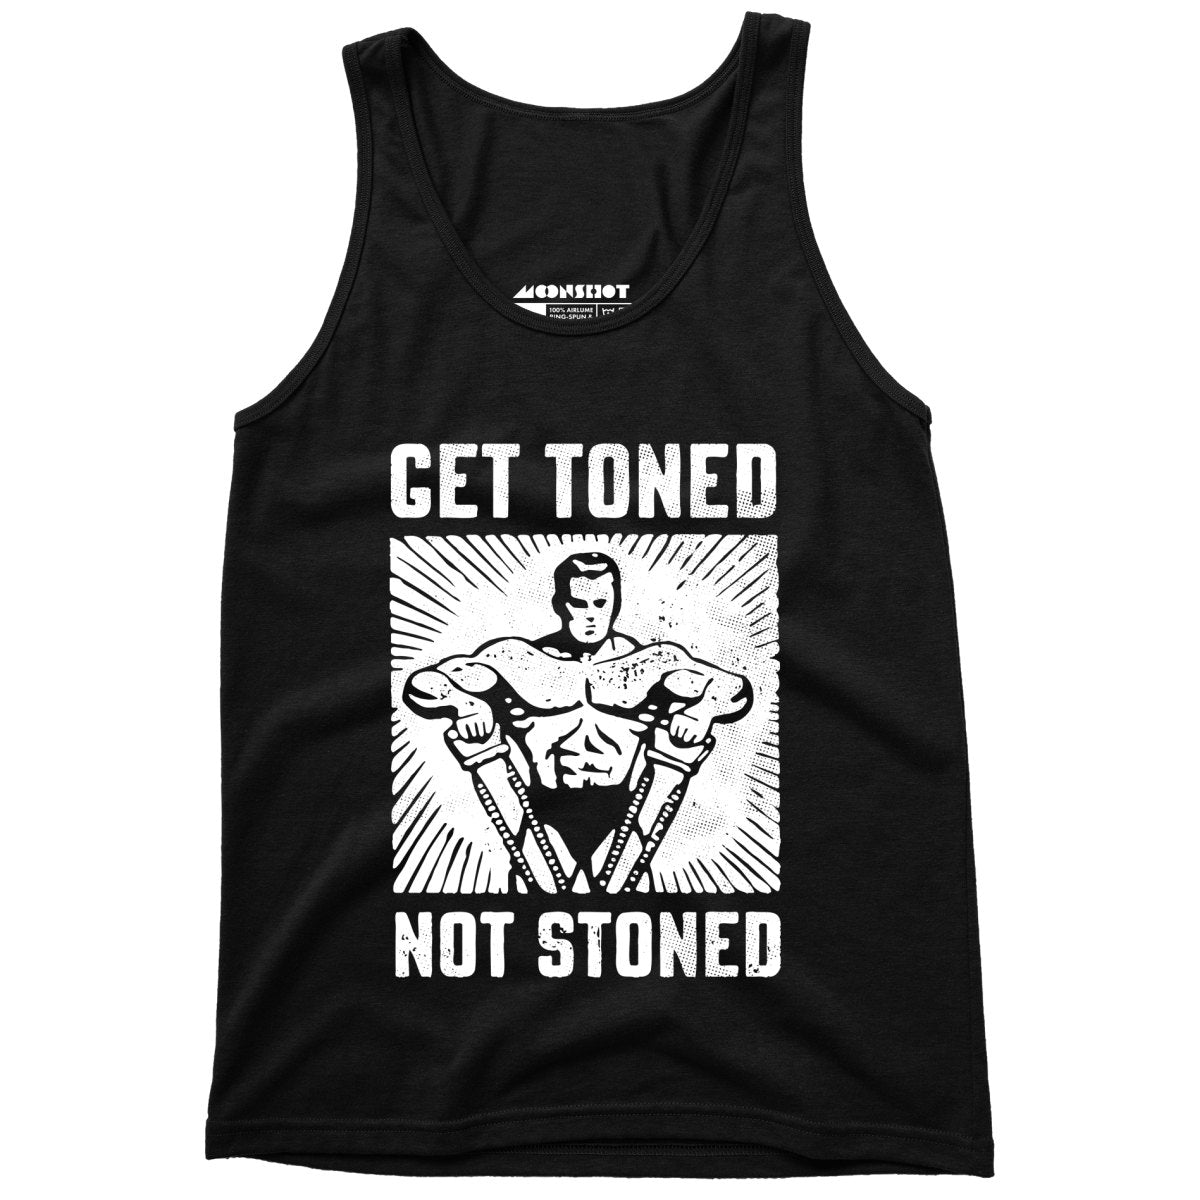 Get Toned Not Stoned - Unisex Tank Top